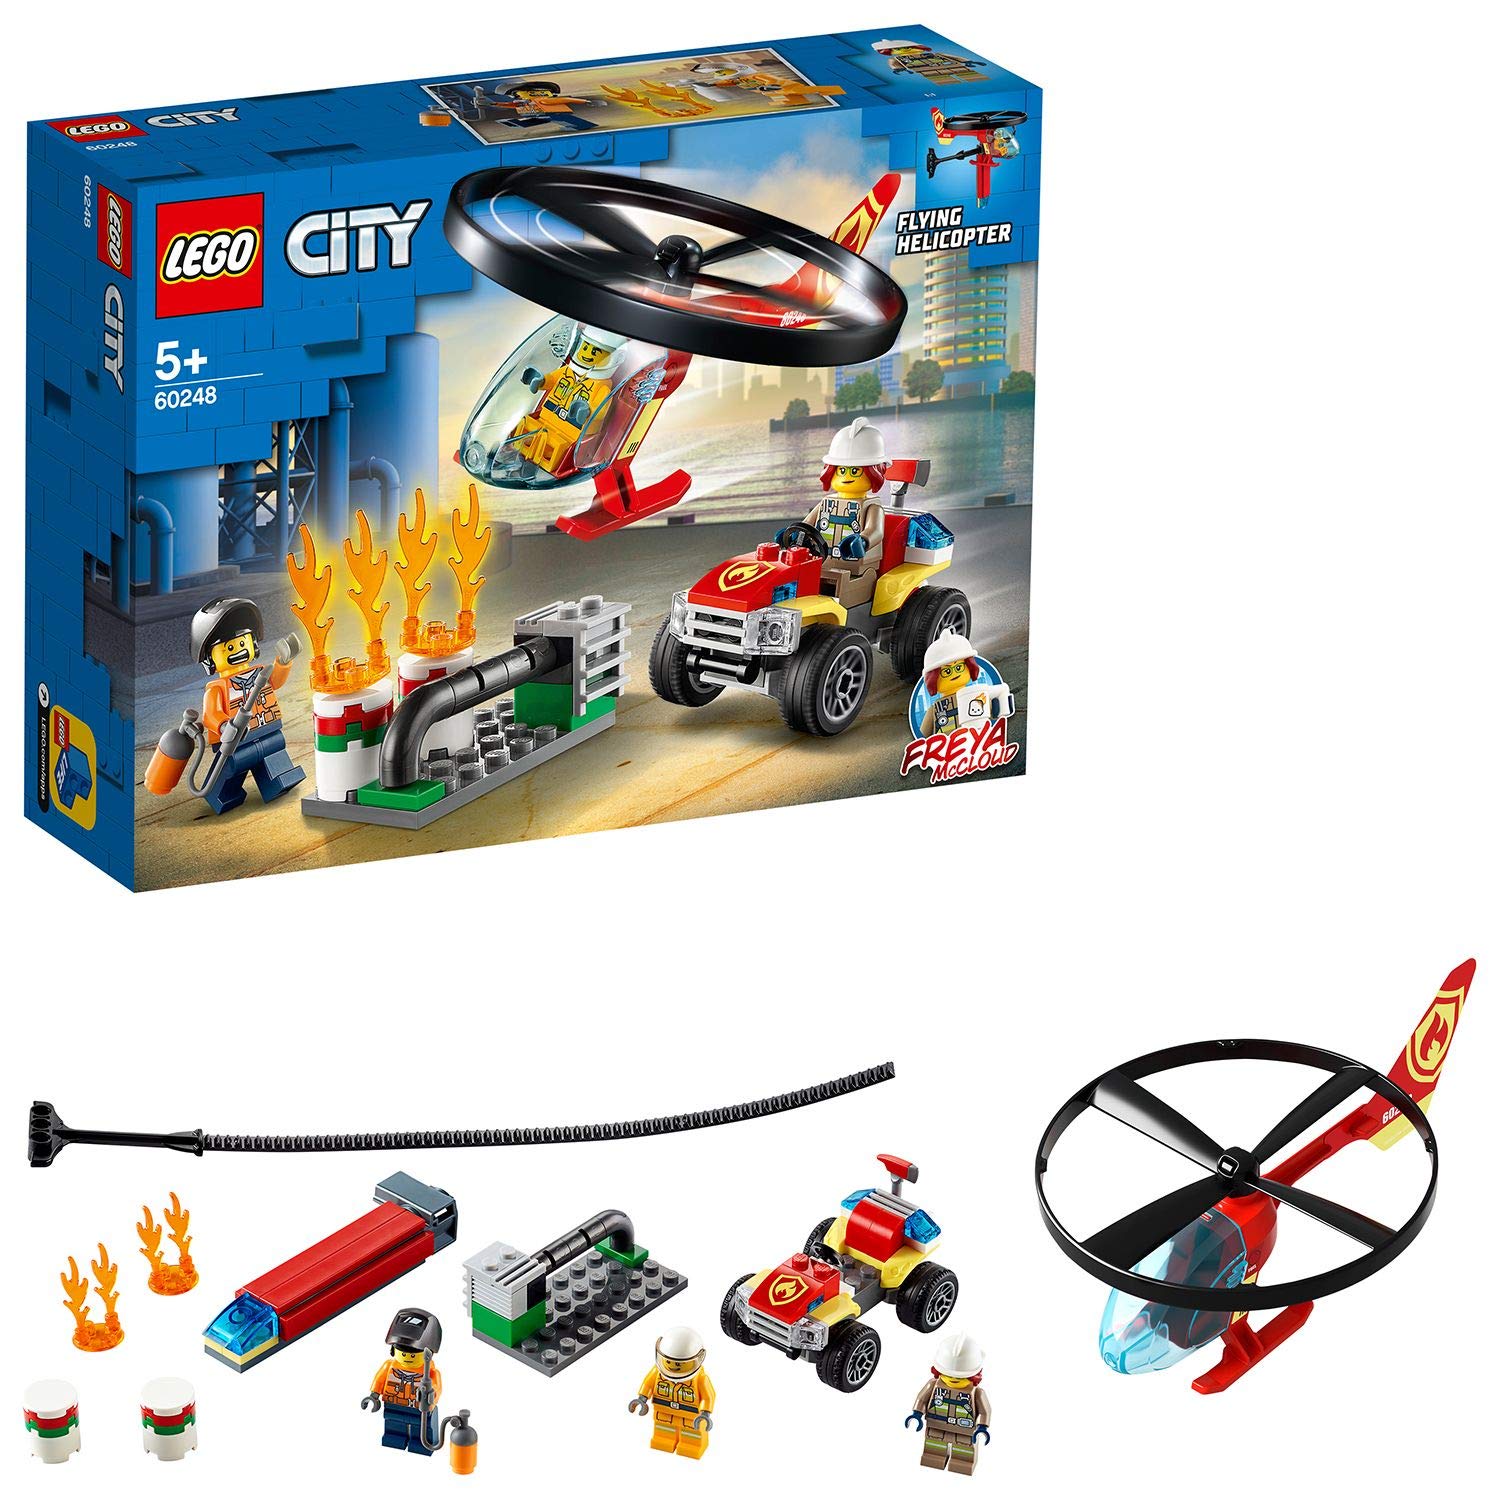 Lego 60248 – Use With Fire Helicopter, City, Construction Kit